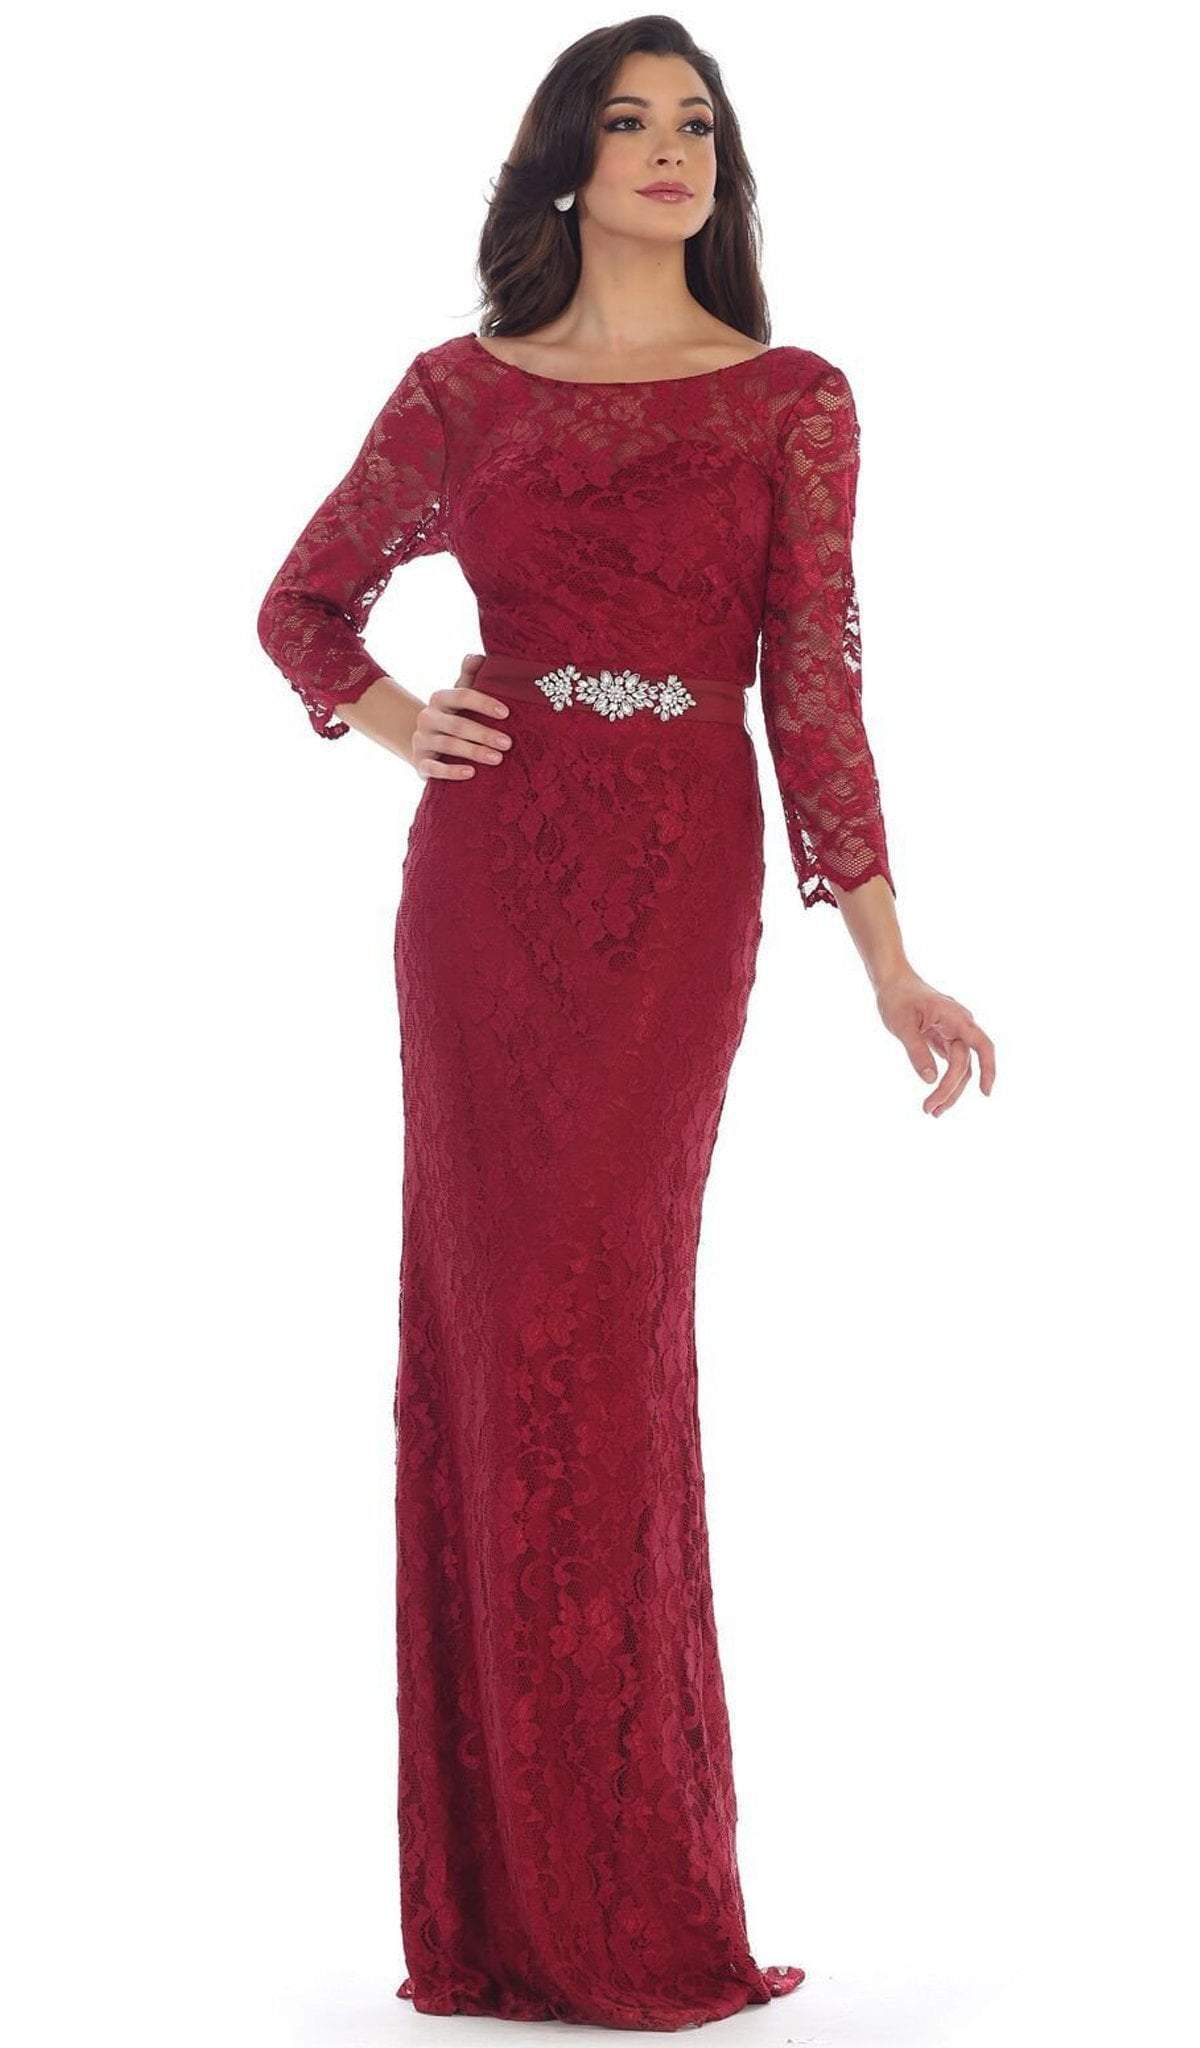 May Queen - Lace Illusion Bateau Sheath Mother of the Bride Dress
